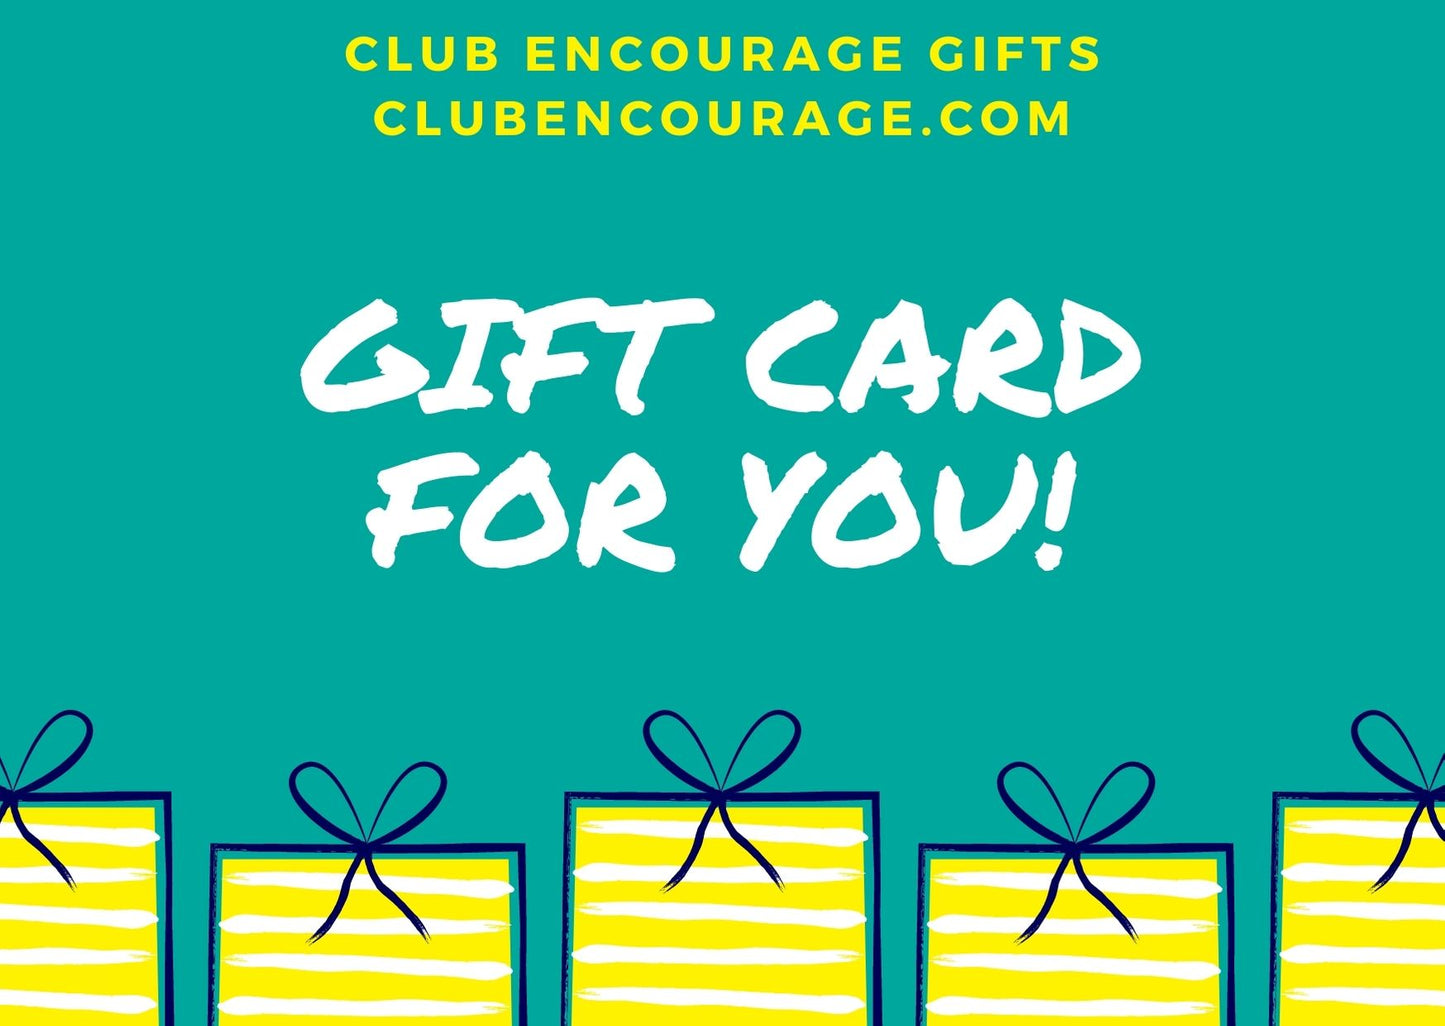 club encourage gifts- gift card